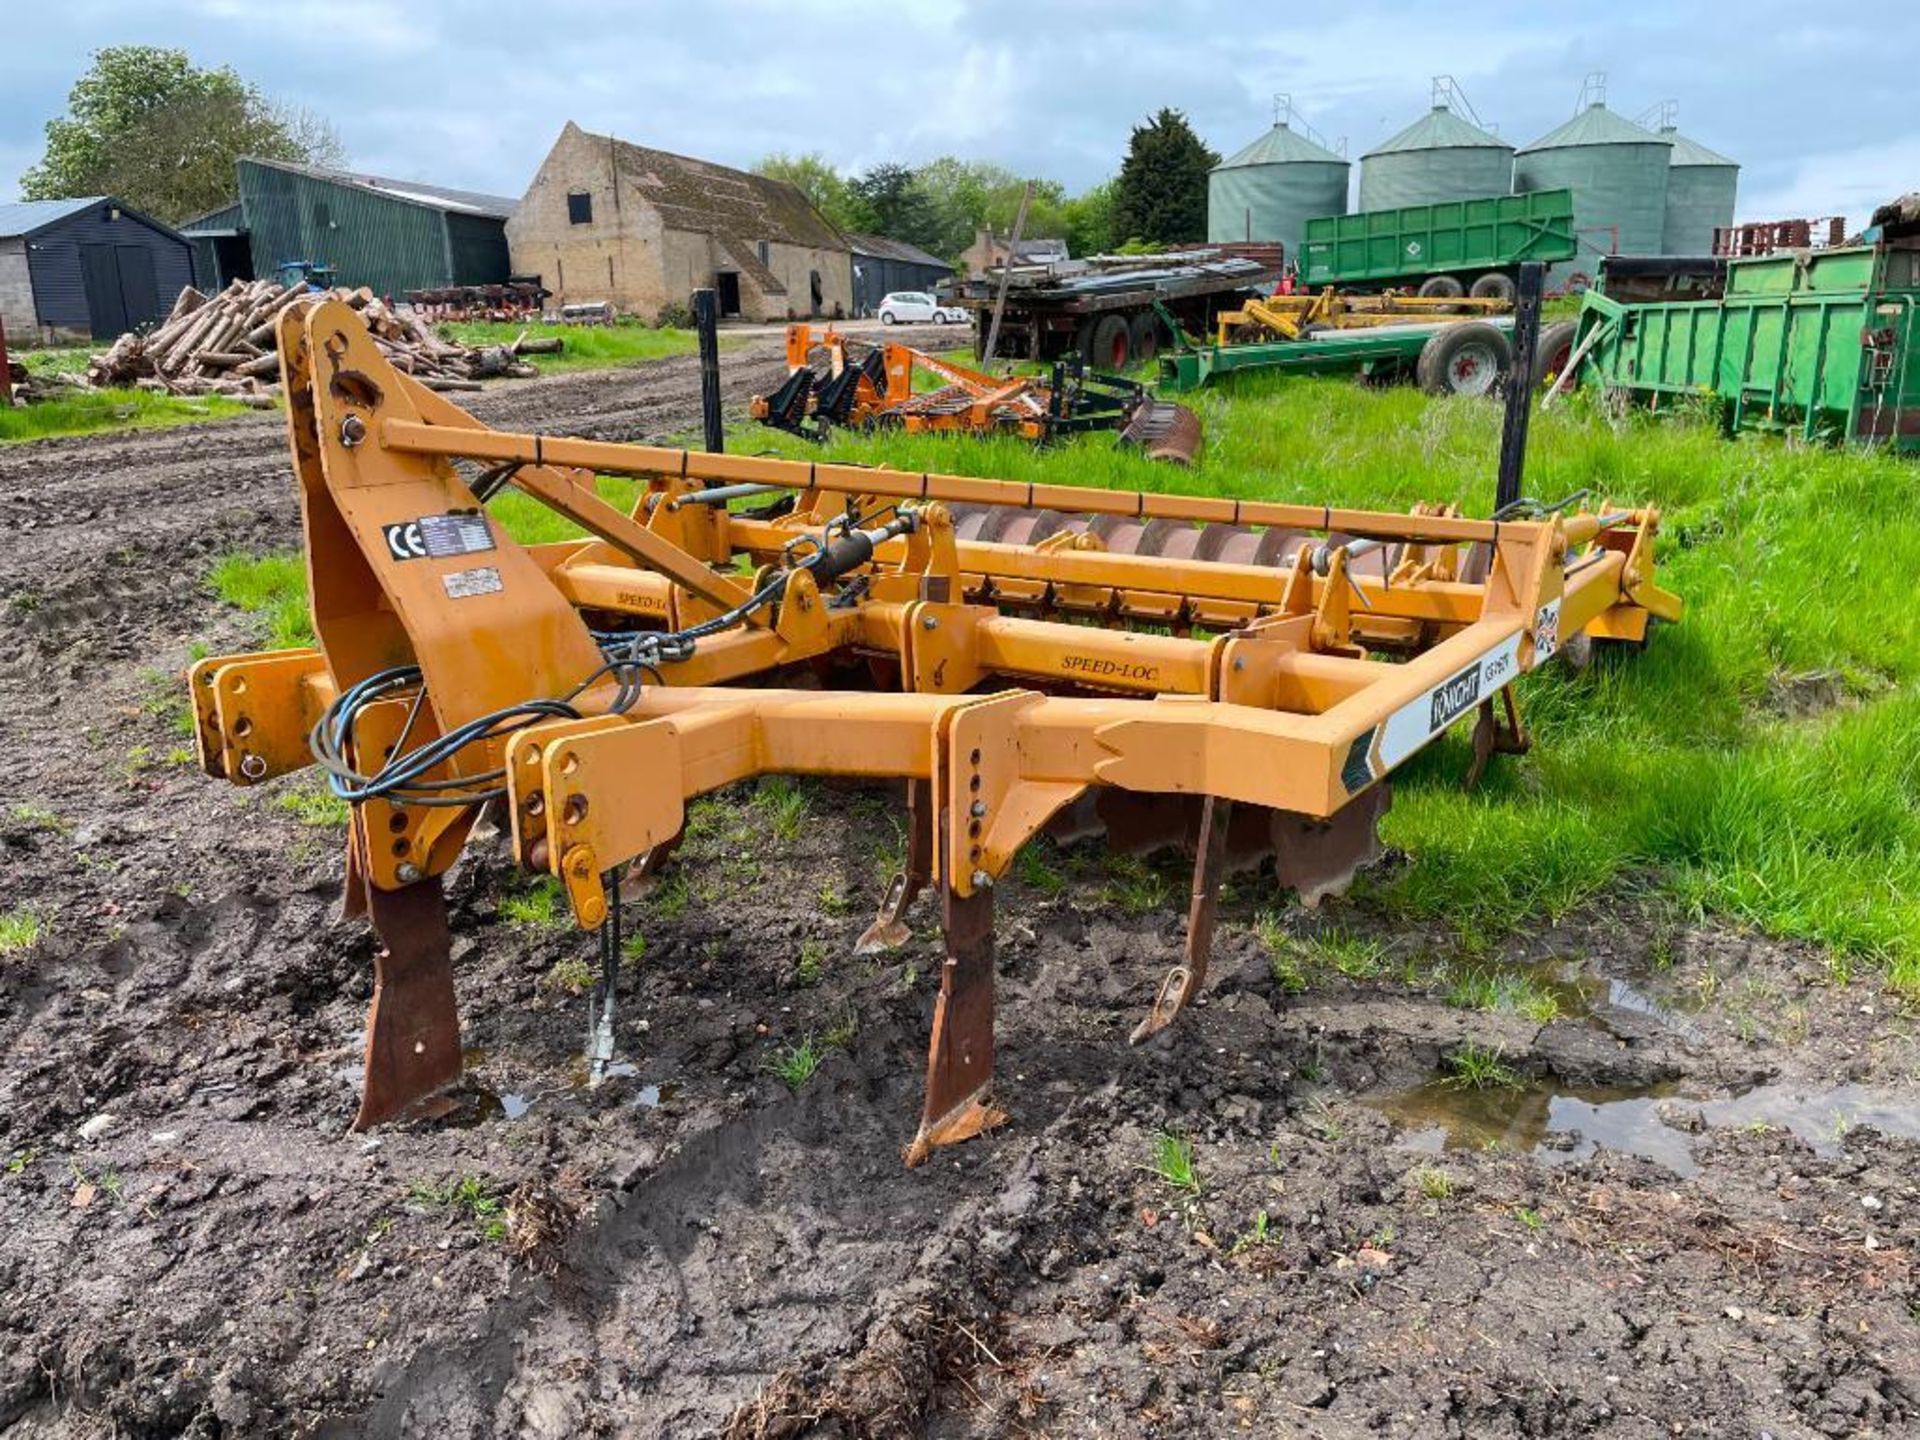 2012 Knight Raven 2.8m cultivator with 3 subsoiler legs, 4 fixed tines, 2 rows discs and rear zonal - Image 2 of 9